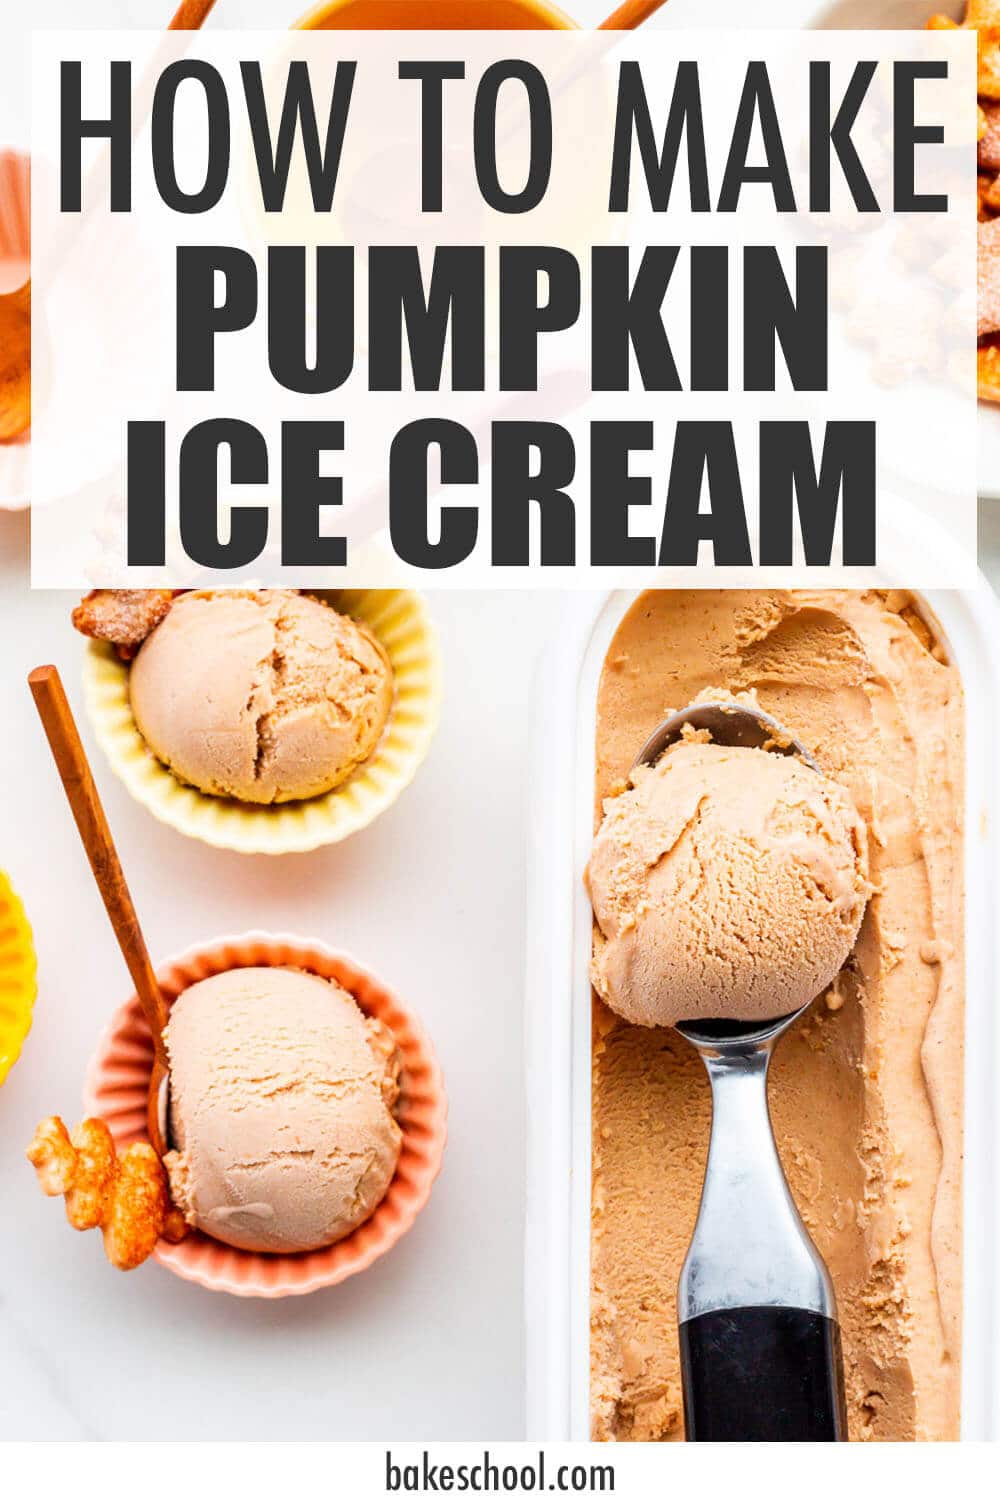 Scooping pumpkin ice cream into small bowls and serving with leaf-shaped pie crust cookies.